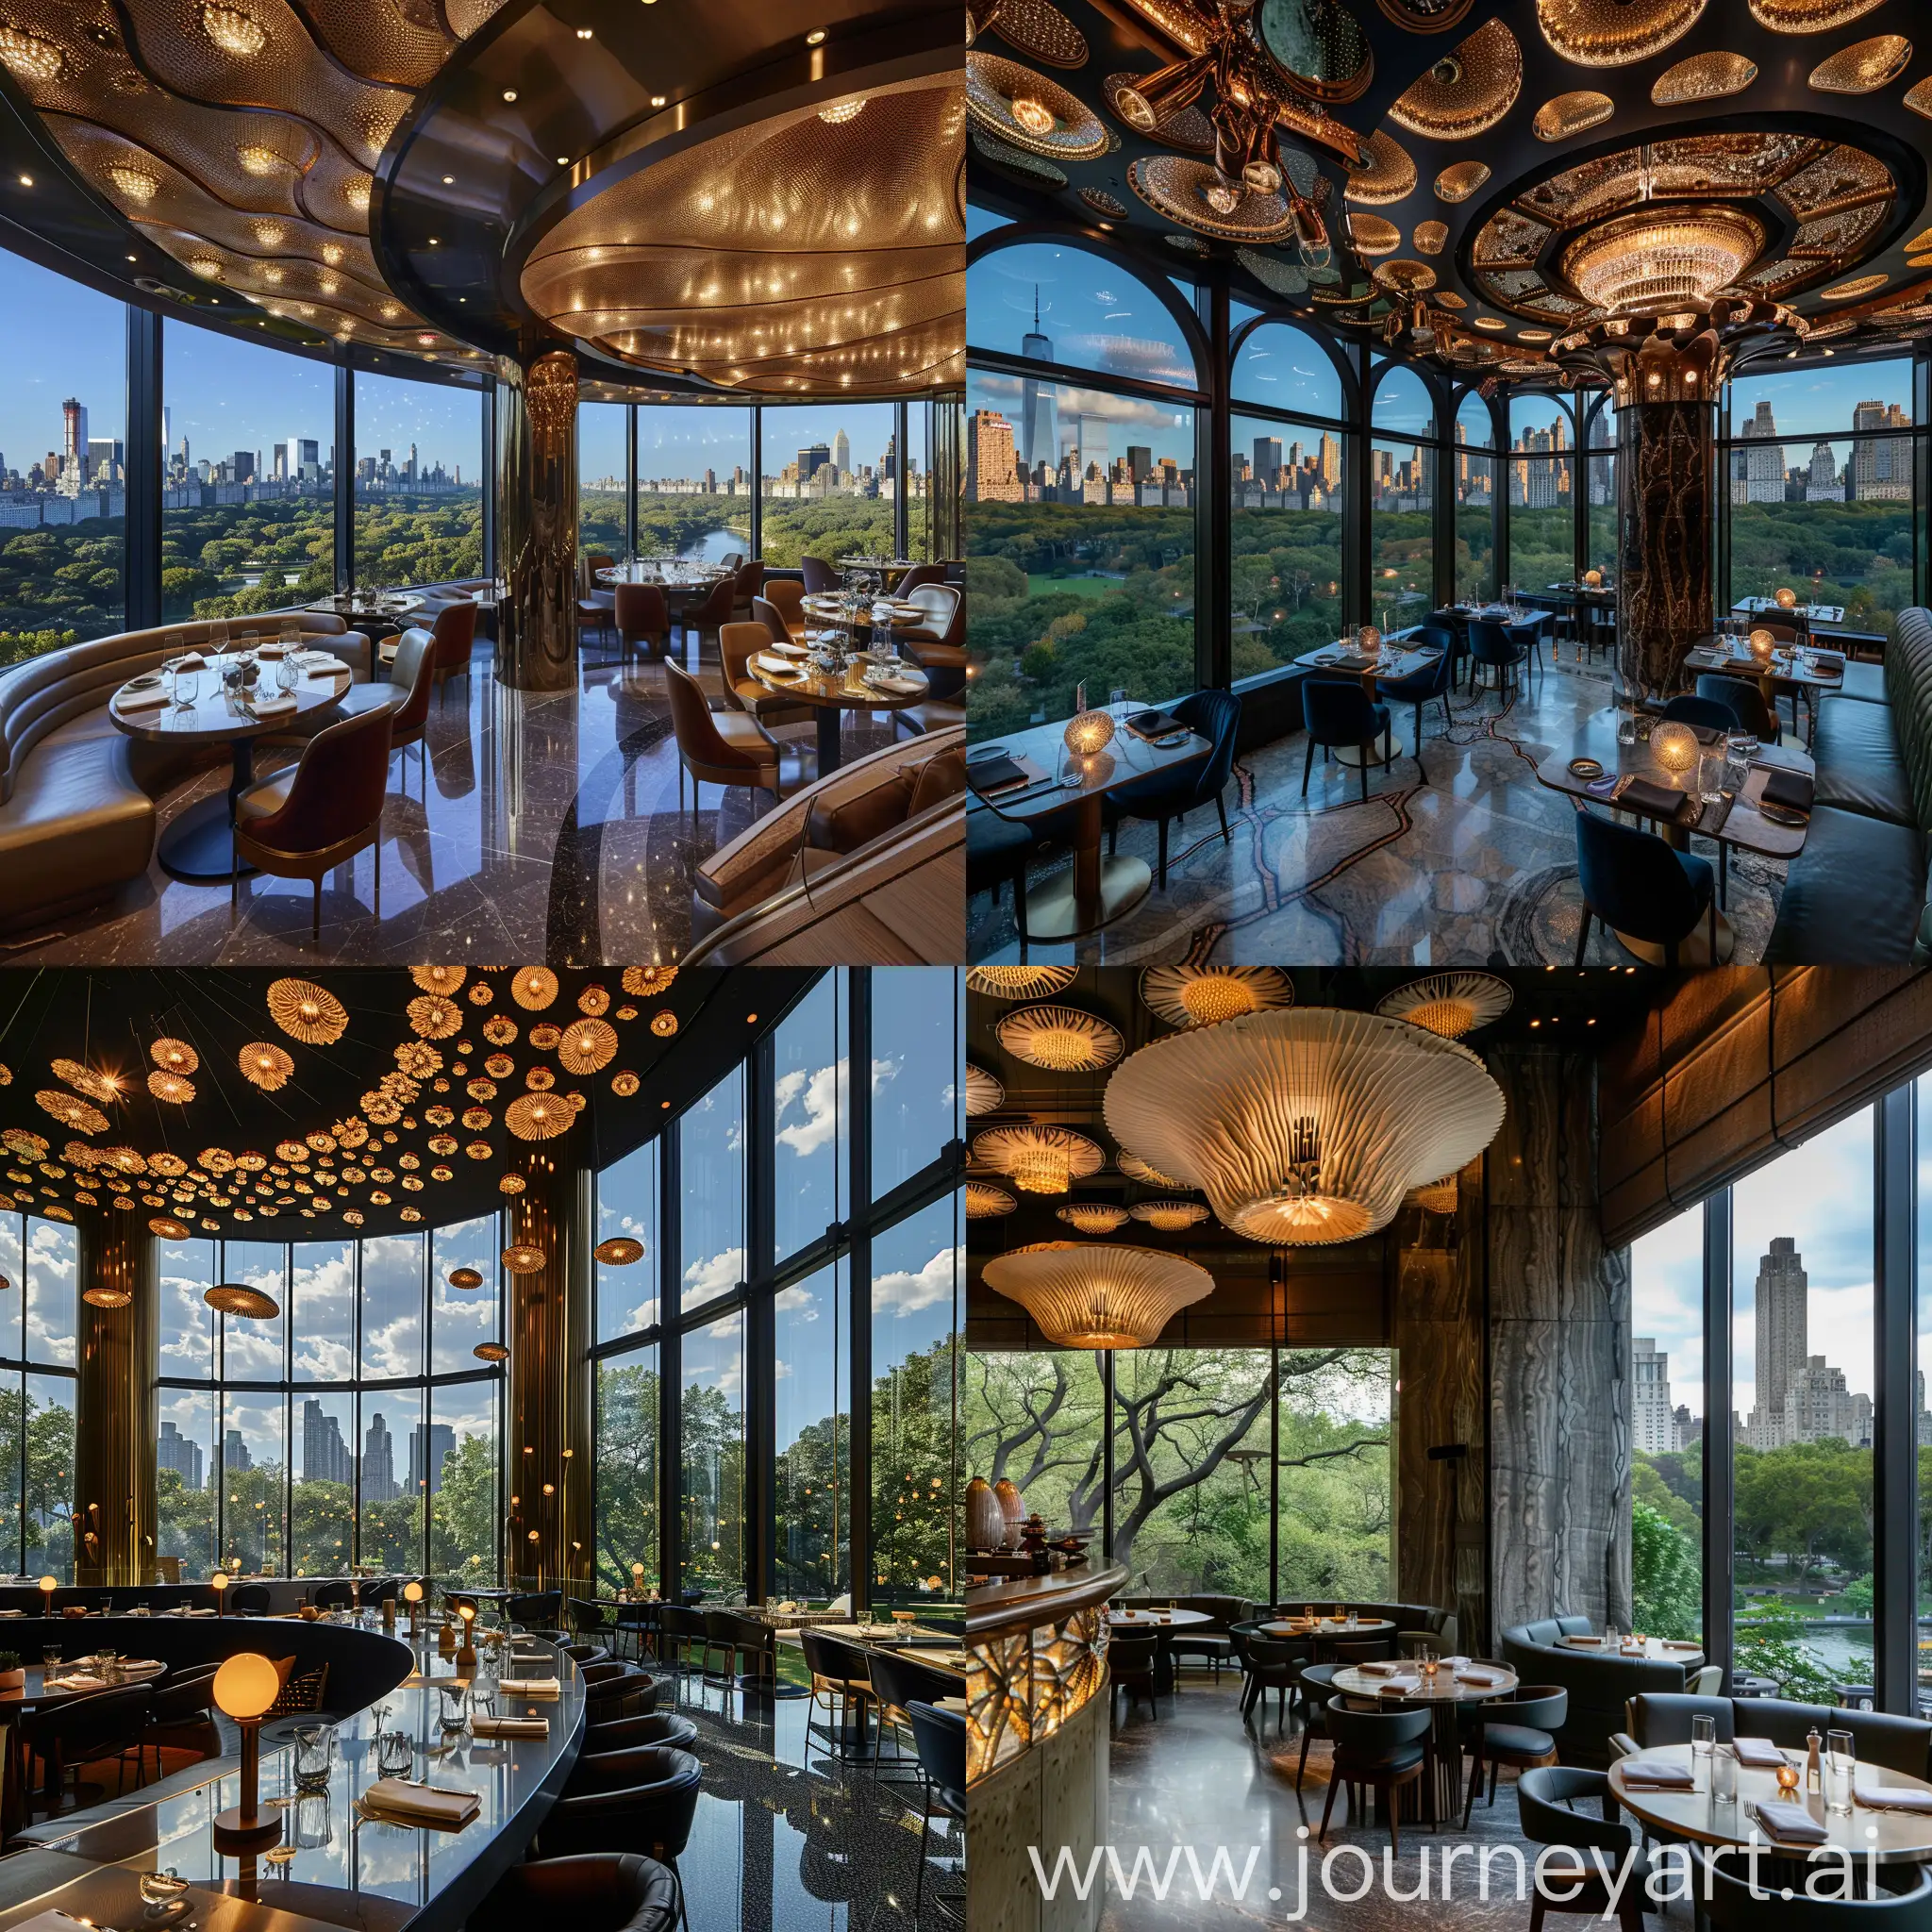 NeoCosmic-Style-Restaurant-Interior-with-Central-Park-Views-and-Mushroom-Lamella-Inspired-Lights